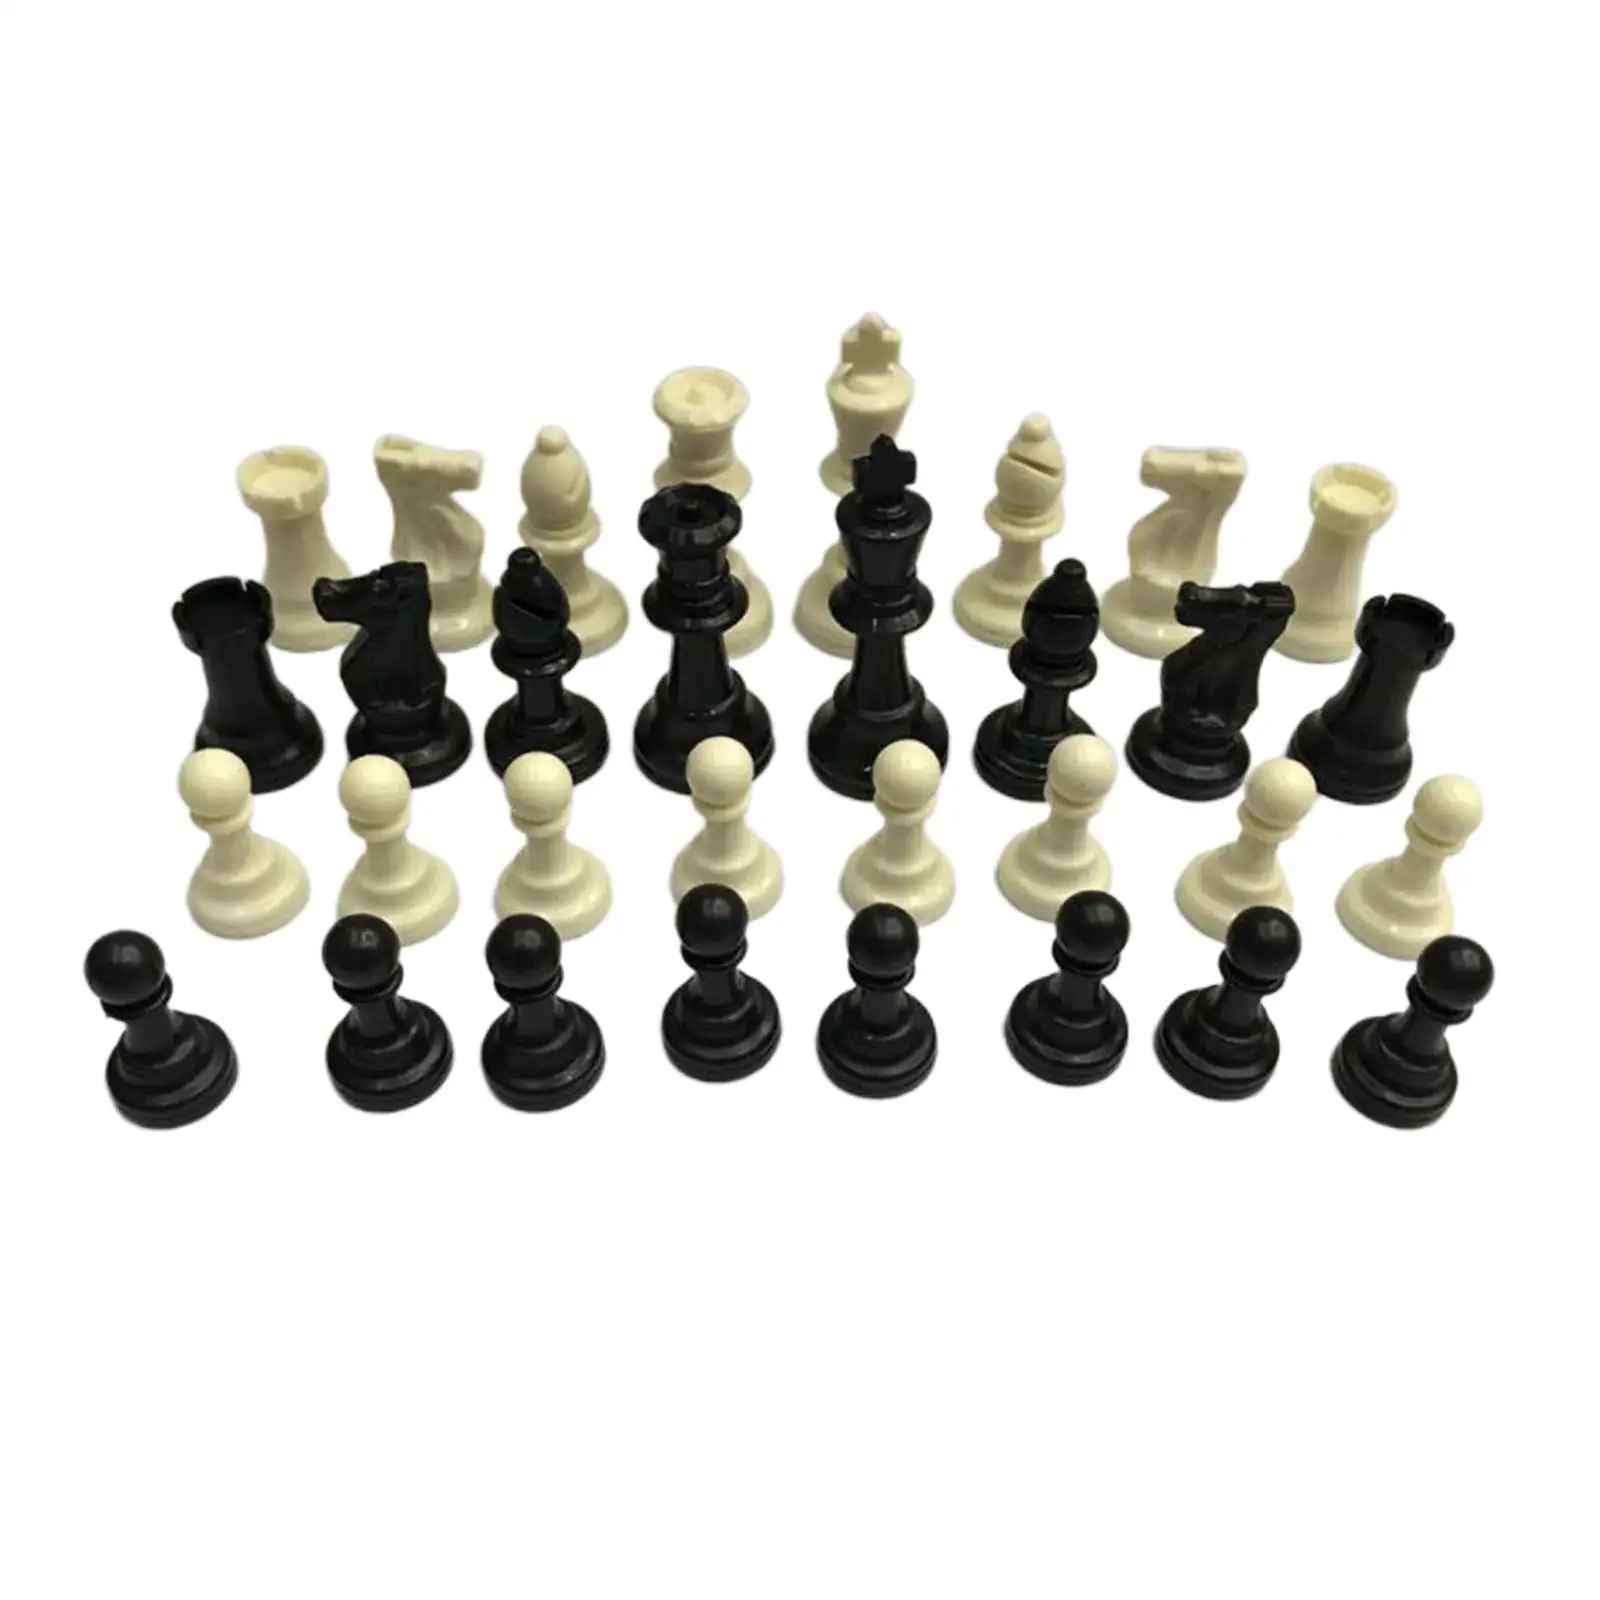 32pcs/set Standard Chess Pieces Set Tournament Checkers Chessmen Pieces Chess 5mm King Gift Easy to Carry without Board